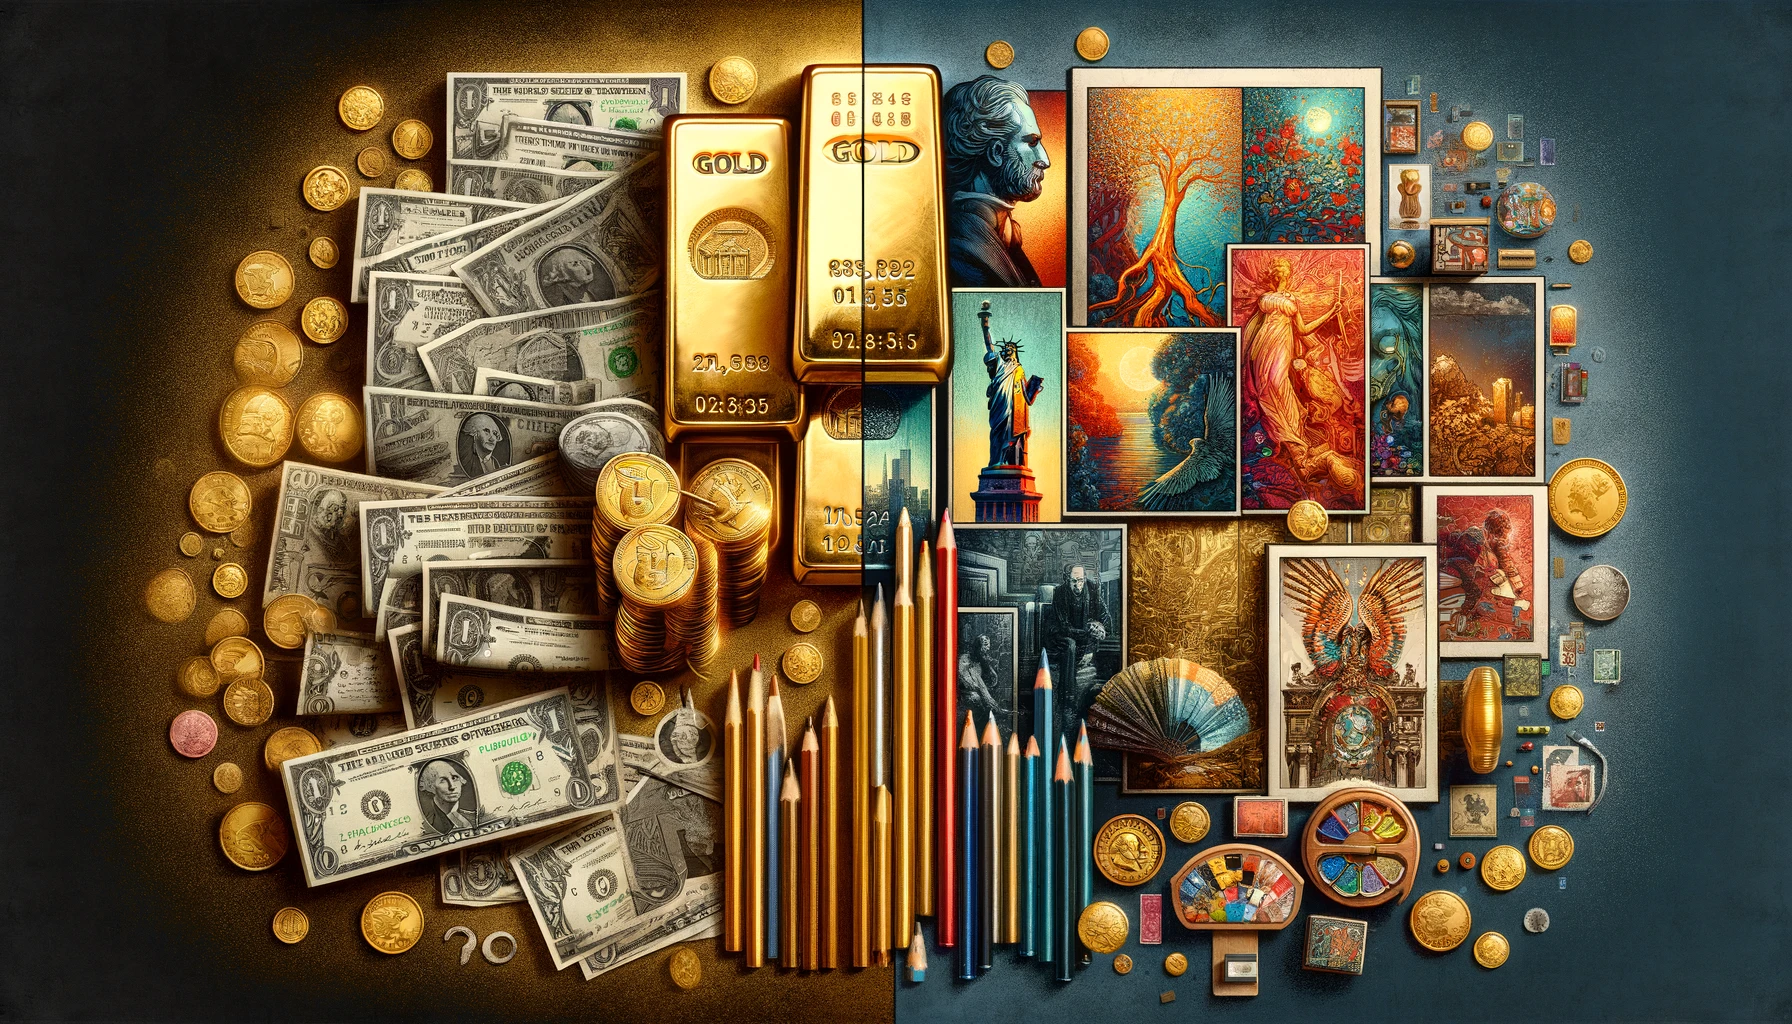 An image depicting a split view of gold bars on one side, symbolizing stability and resilience, and a collection of art, comics, and stamps on the other, representing cultural value and rarity, to illustrate the investment choices between gold and collectibles.